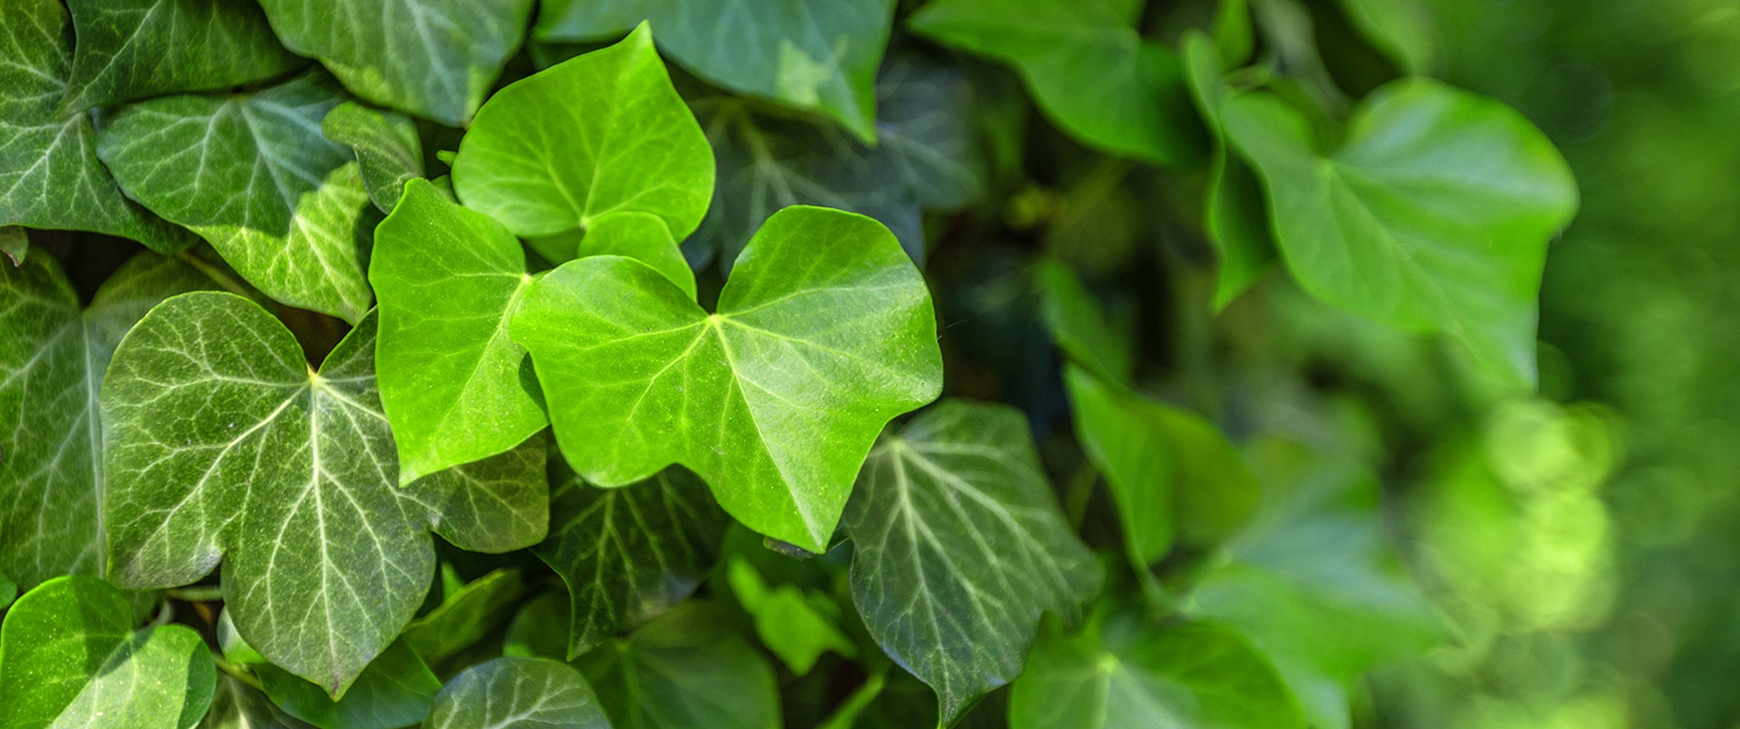 Our Care Guide for Indoor Common English Ivy (Hedera Helix)